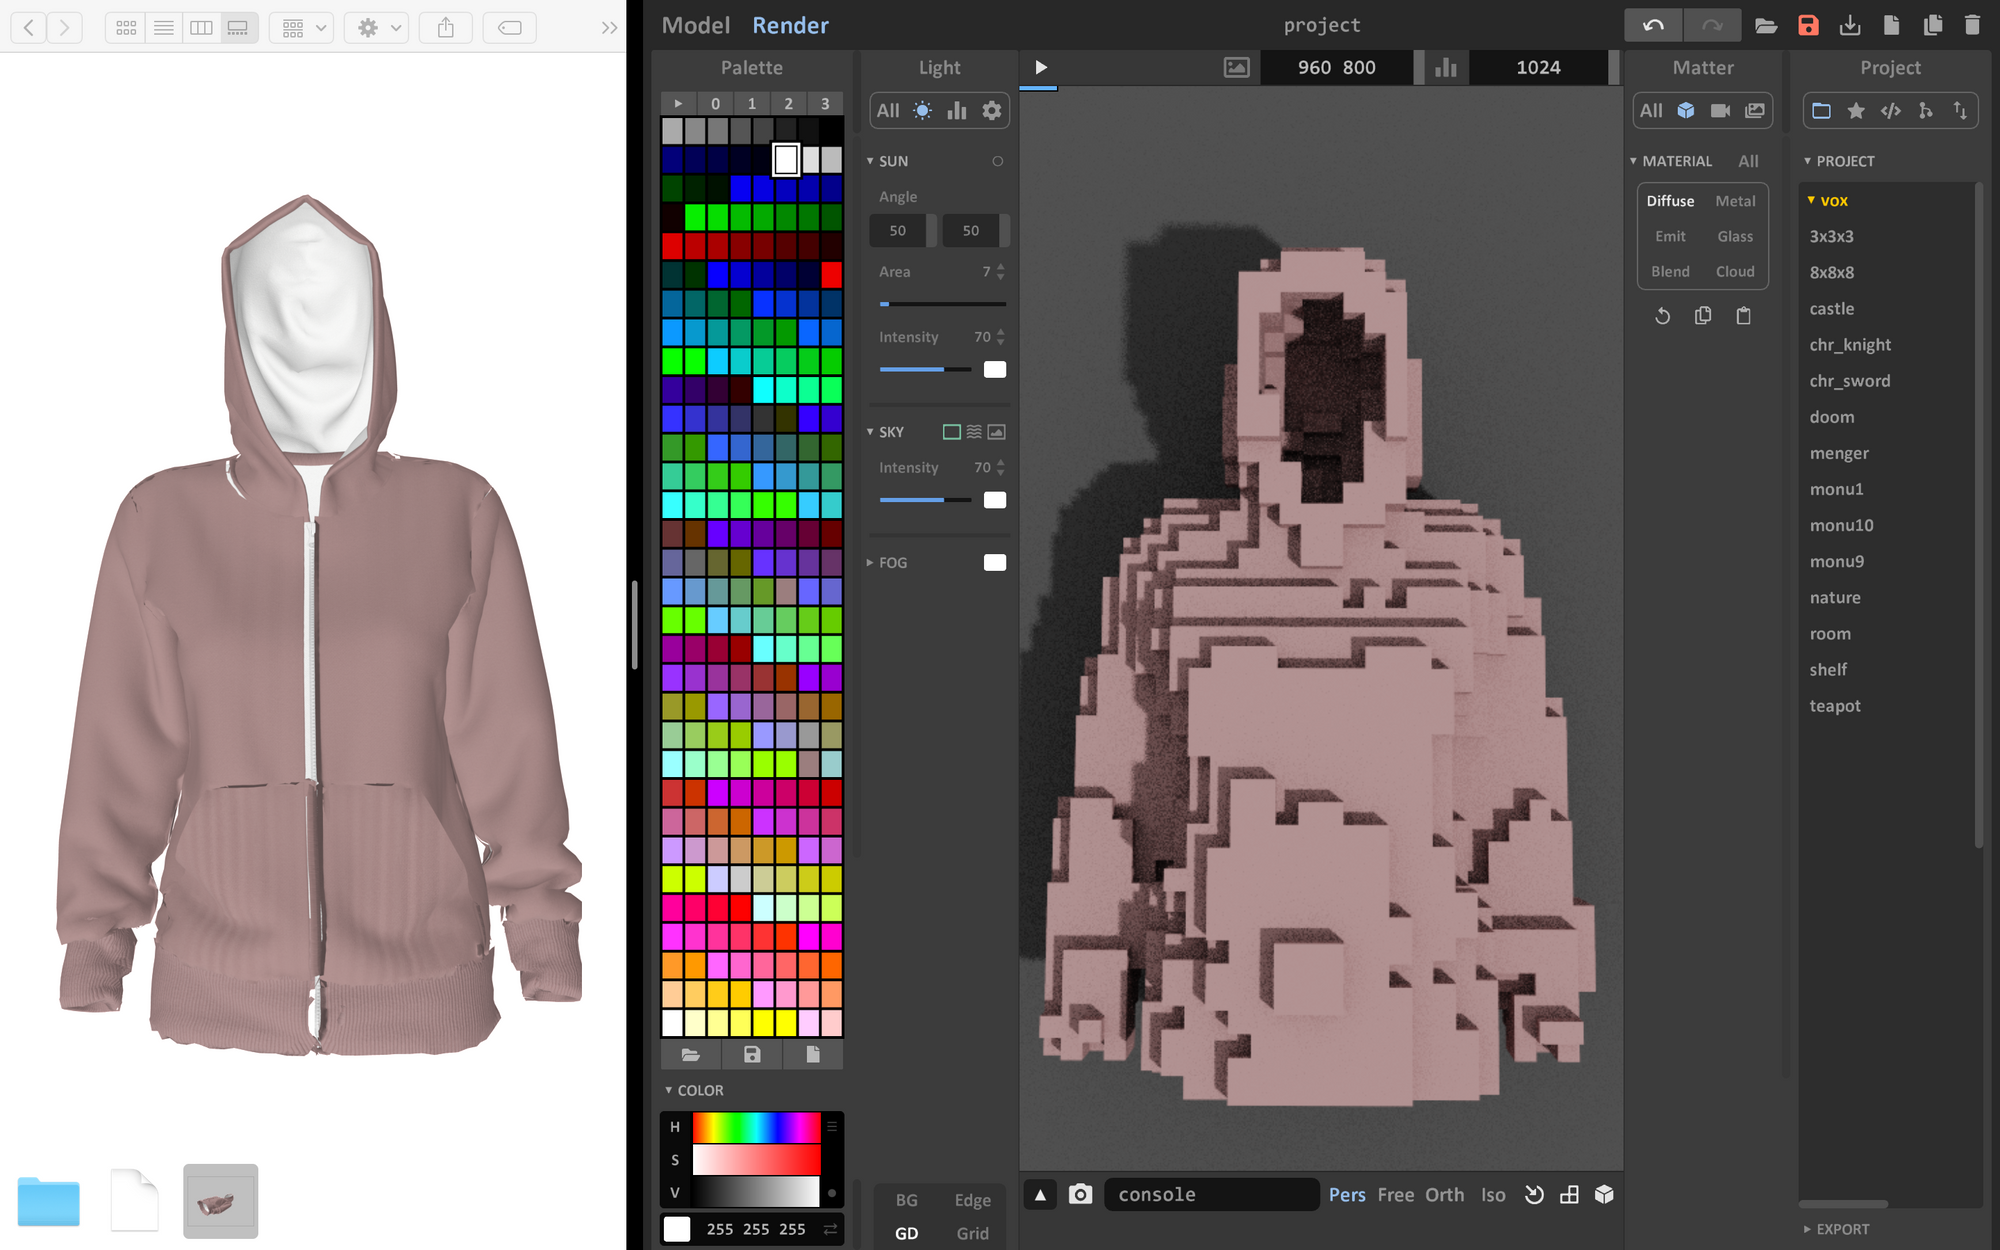 A 3D model of a light pink sweater on the left of the image, and a voxel version of the sweater on the right of the image.